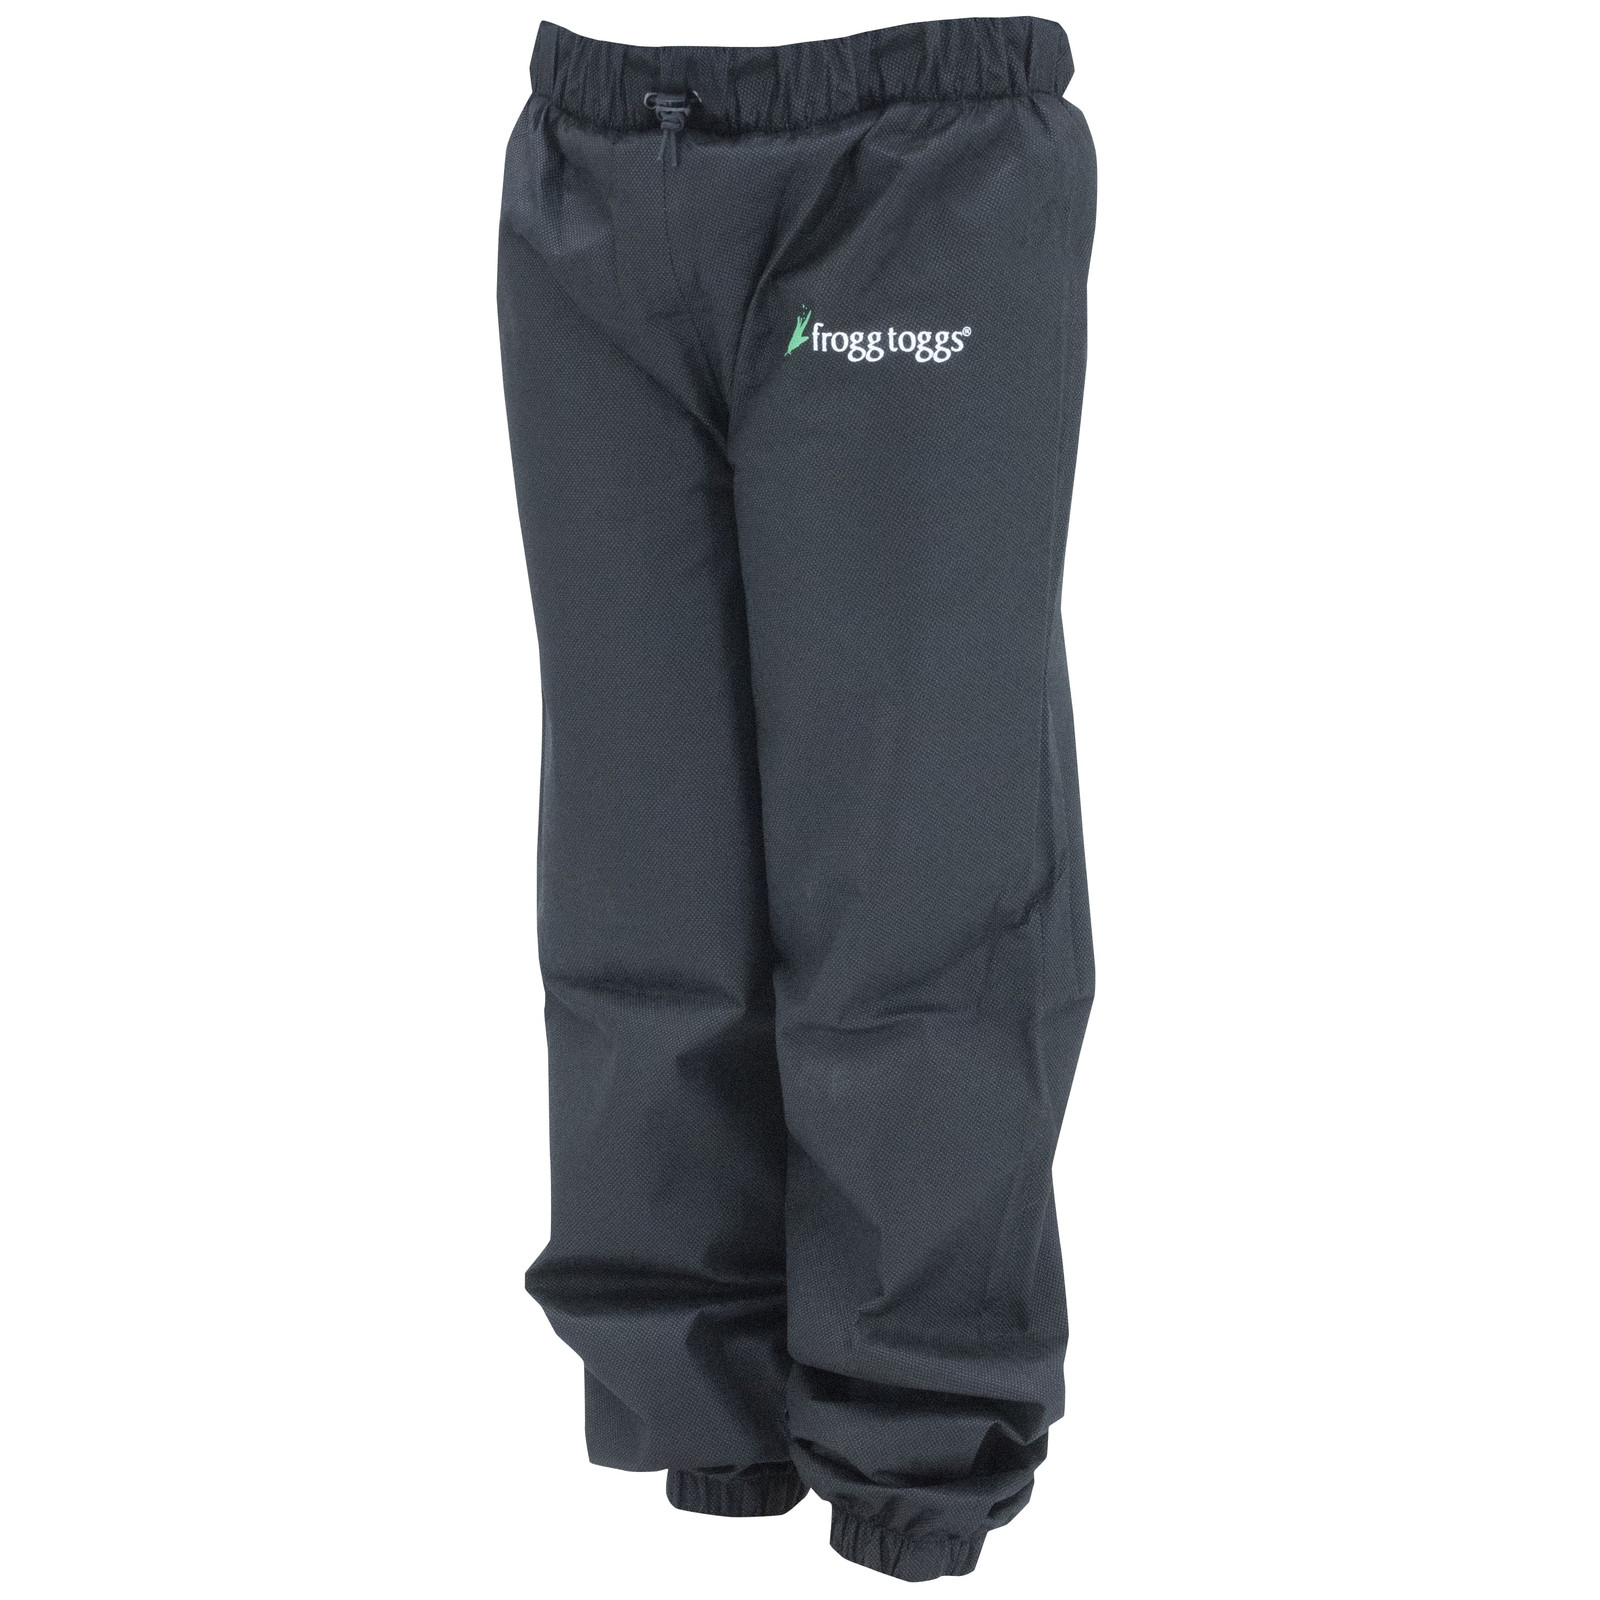 Polly Woggs Youth Rain Pant